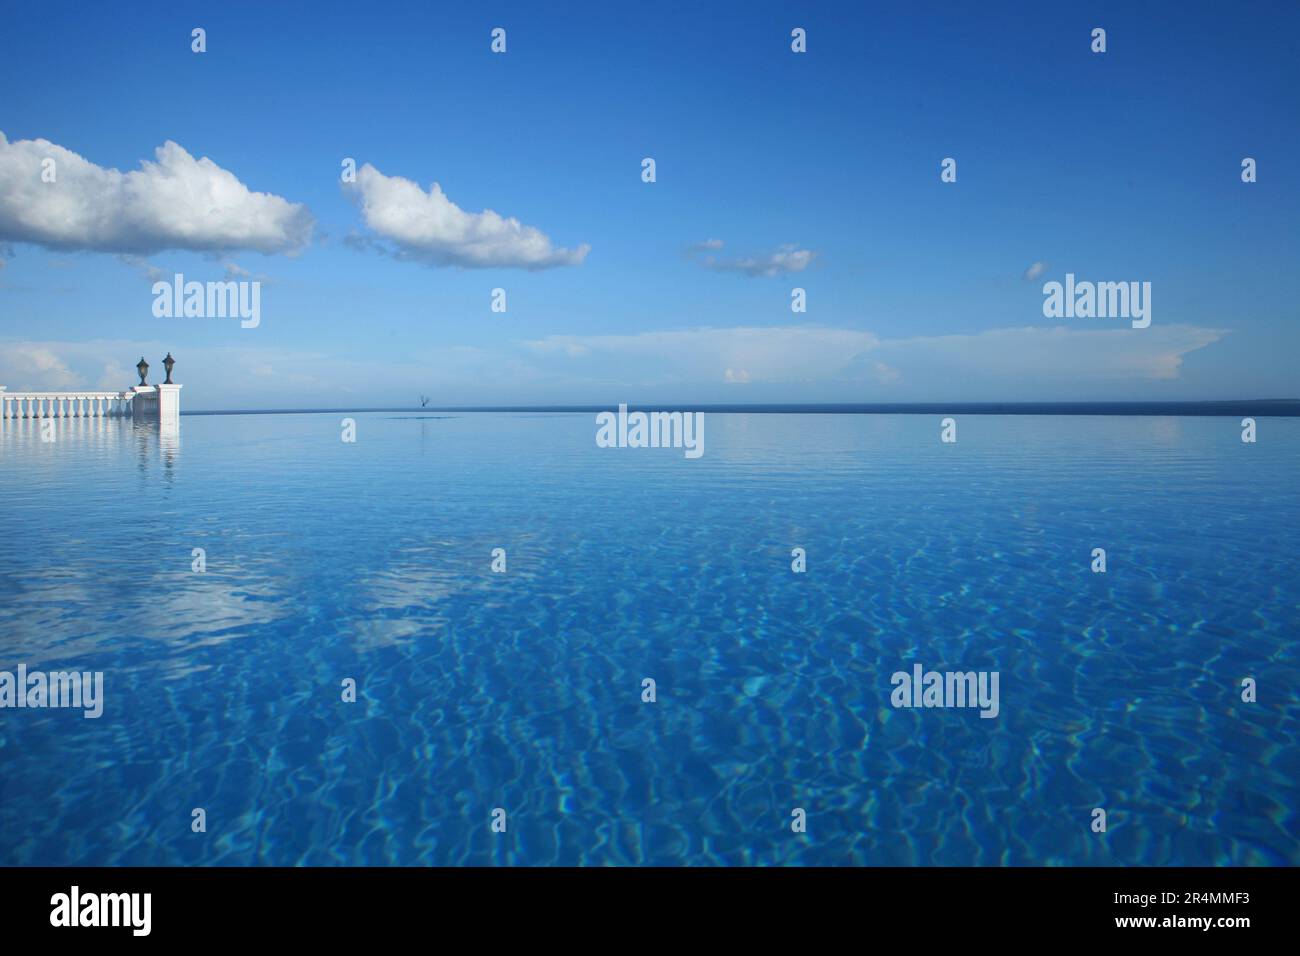 Enormous infinity pool beneath a blue sky at a hotel resort in the Philippines. Stock Photo